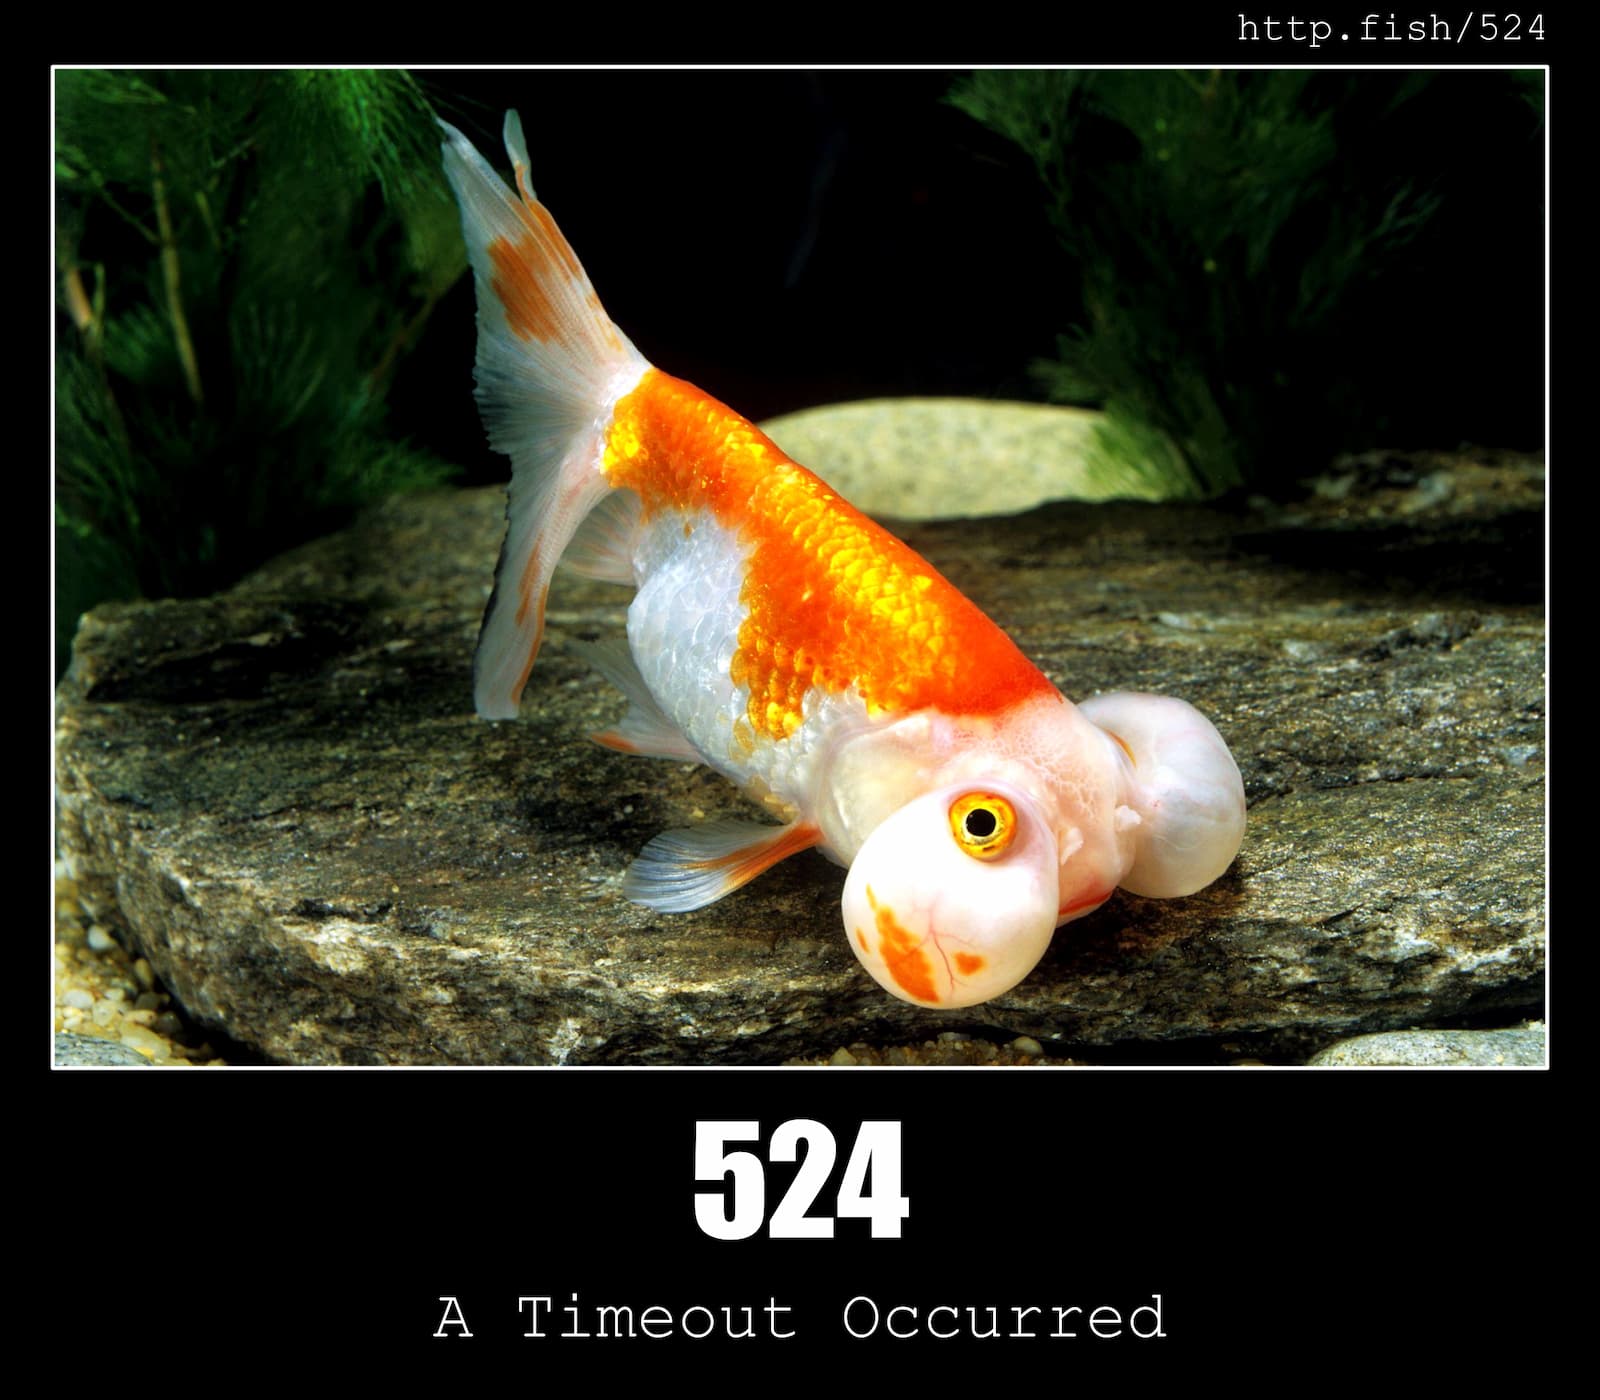 HTTP Status Code 524 A Timeout Occurred & Fish